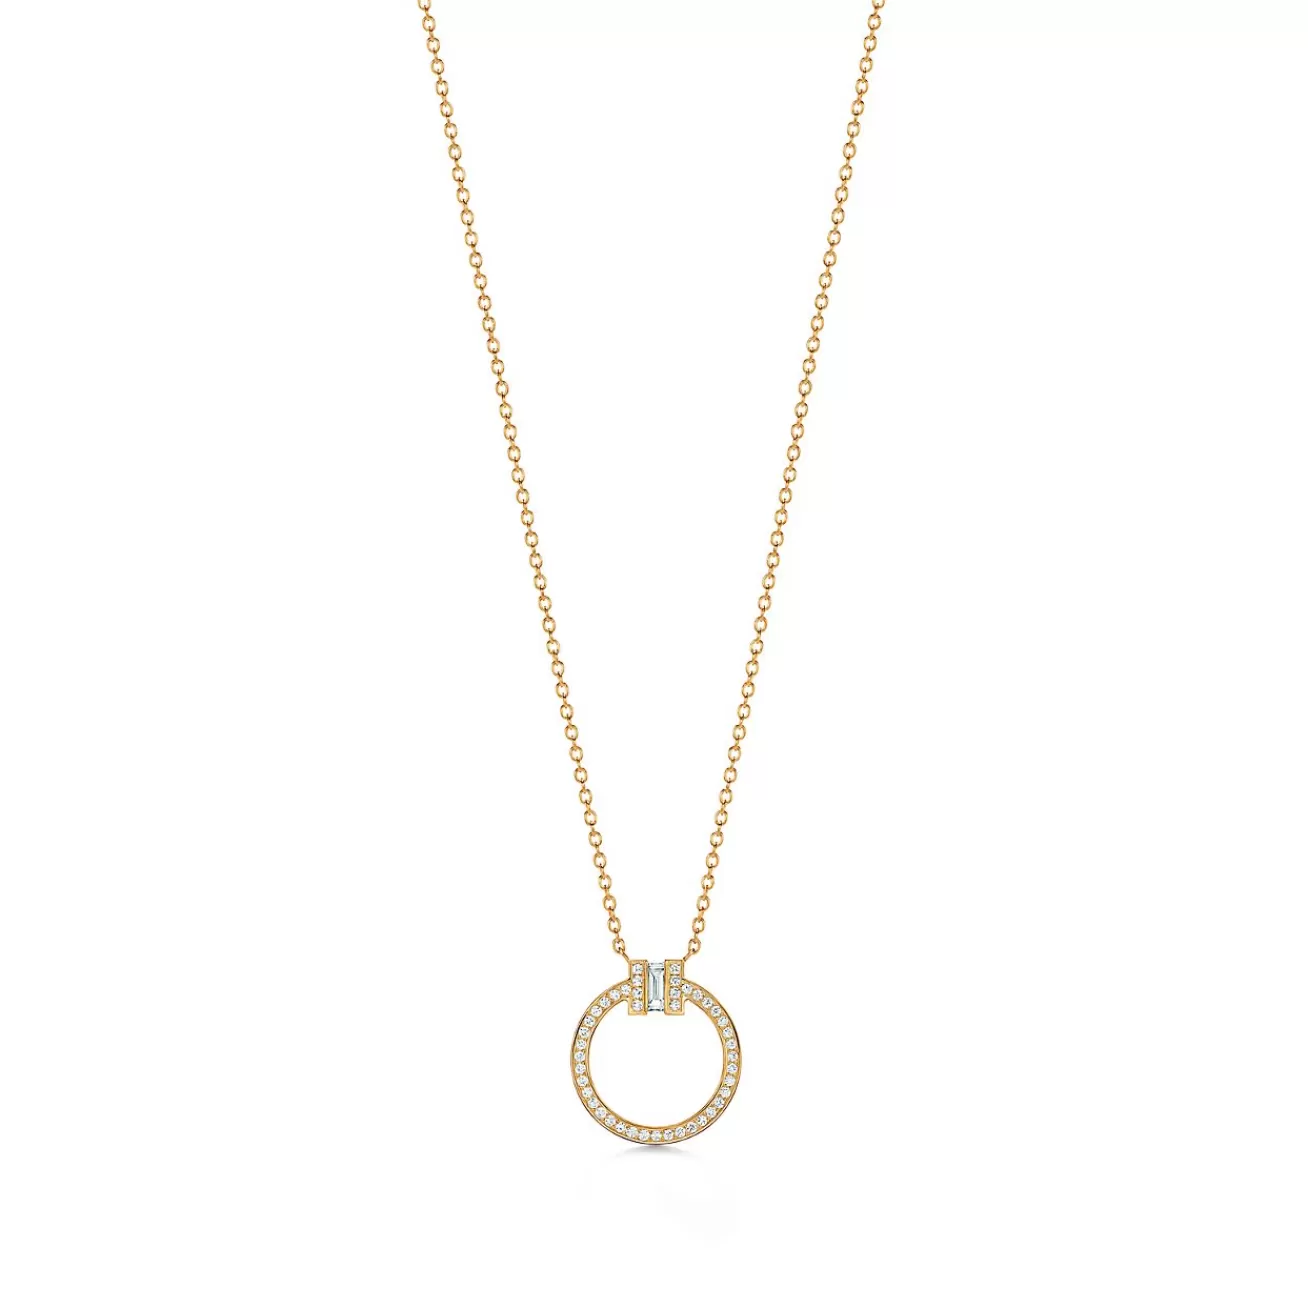 Tiffany & Co. Tiffany T diamond pendant in 18k gold with a baguette diamond. | ^ Necklaces & Pendants | Gold Jewelry